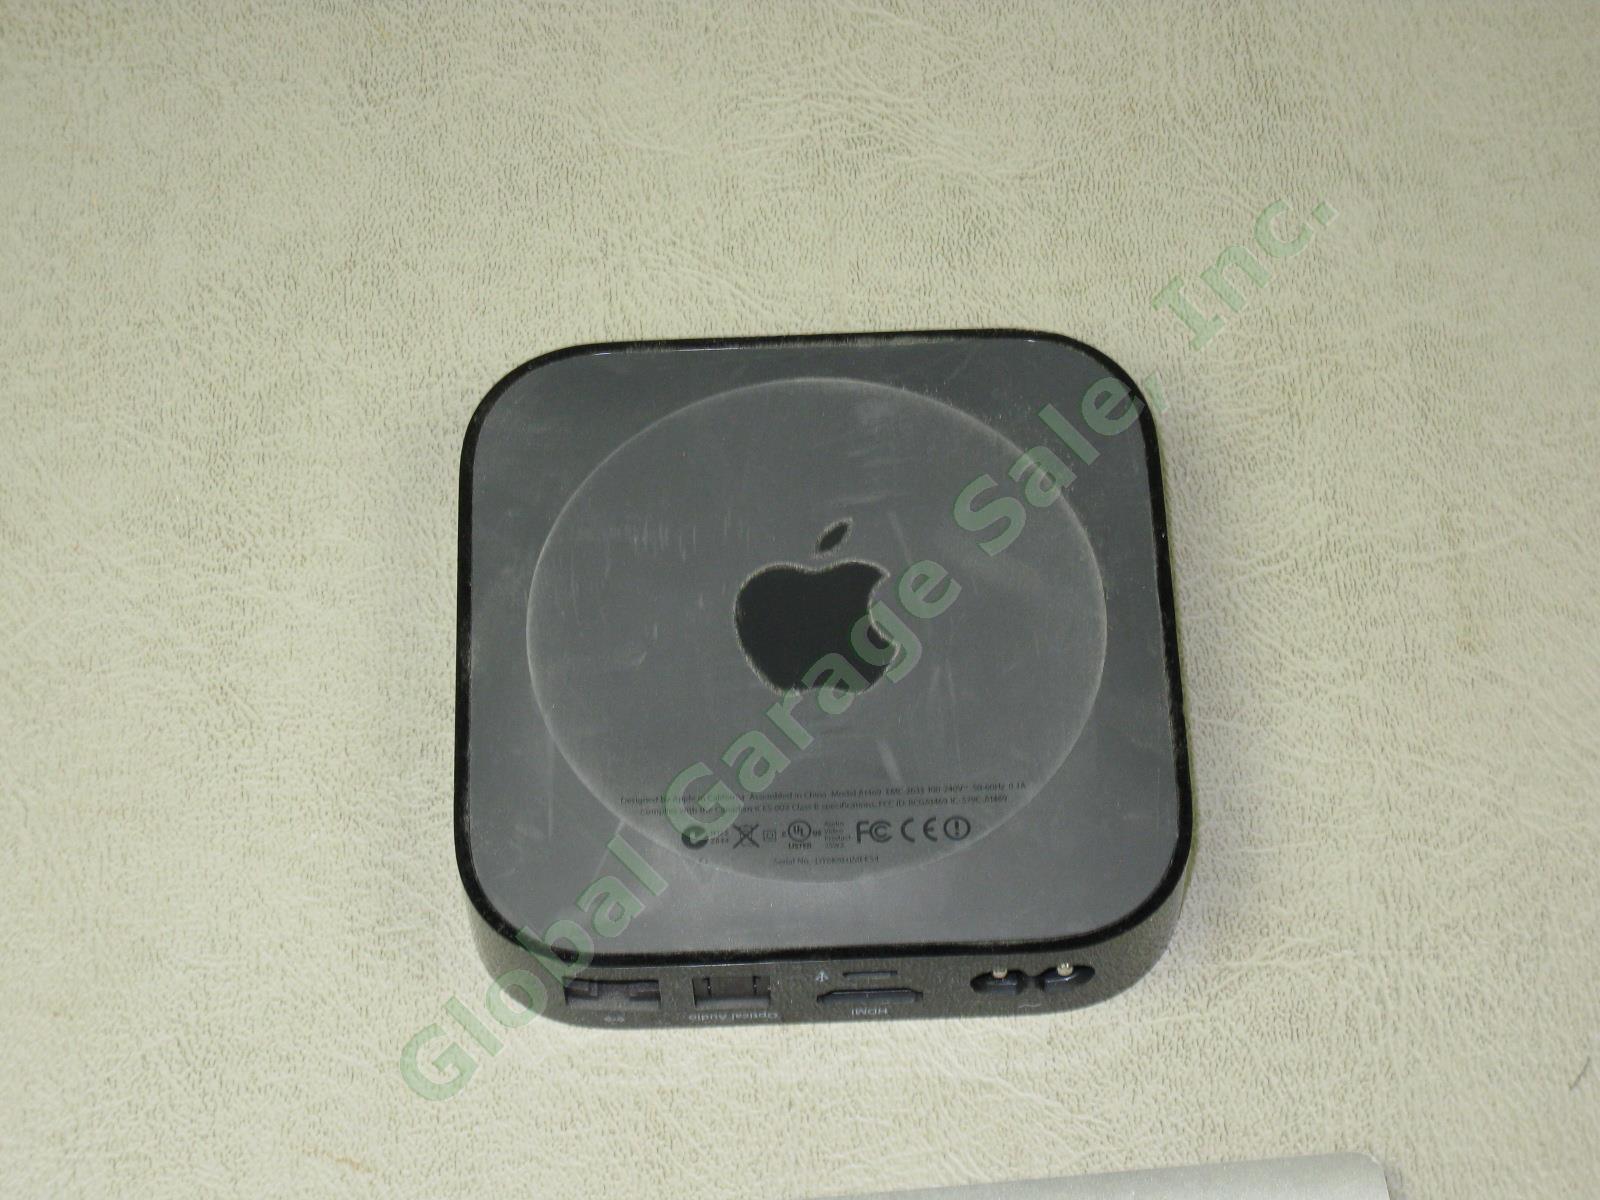 Apple TV 1080p Model A1469 3rd Gen Generation MD199LL/A One Owner w/ Remote NR! 2